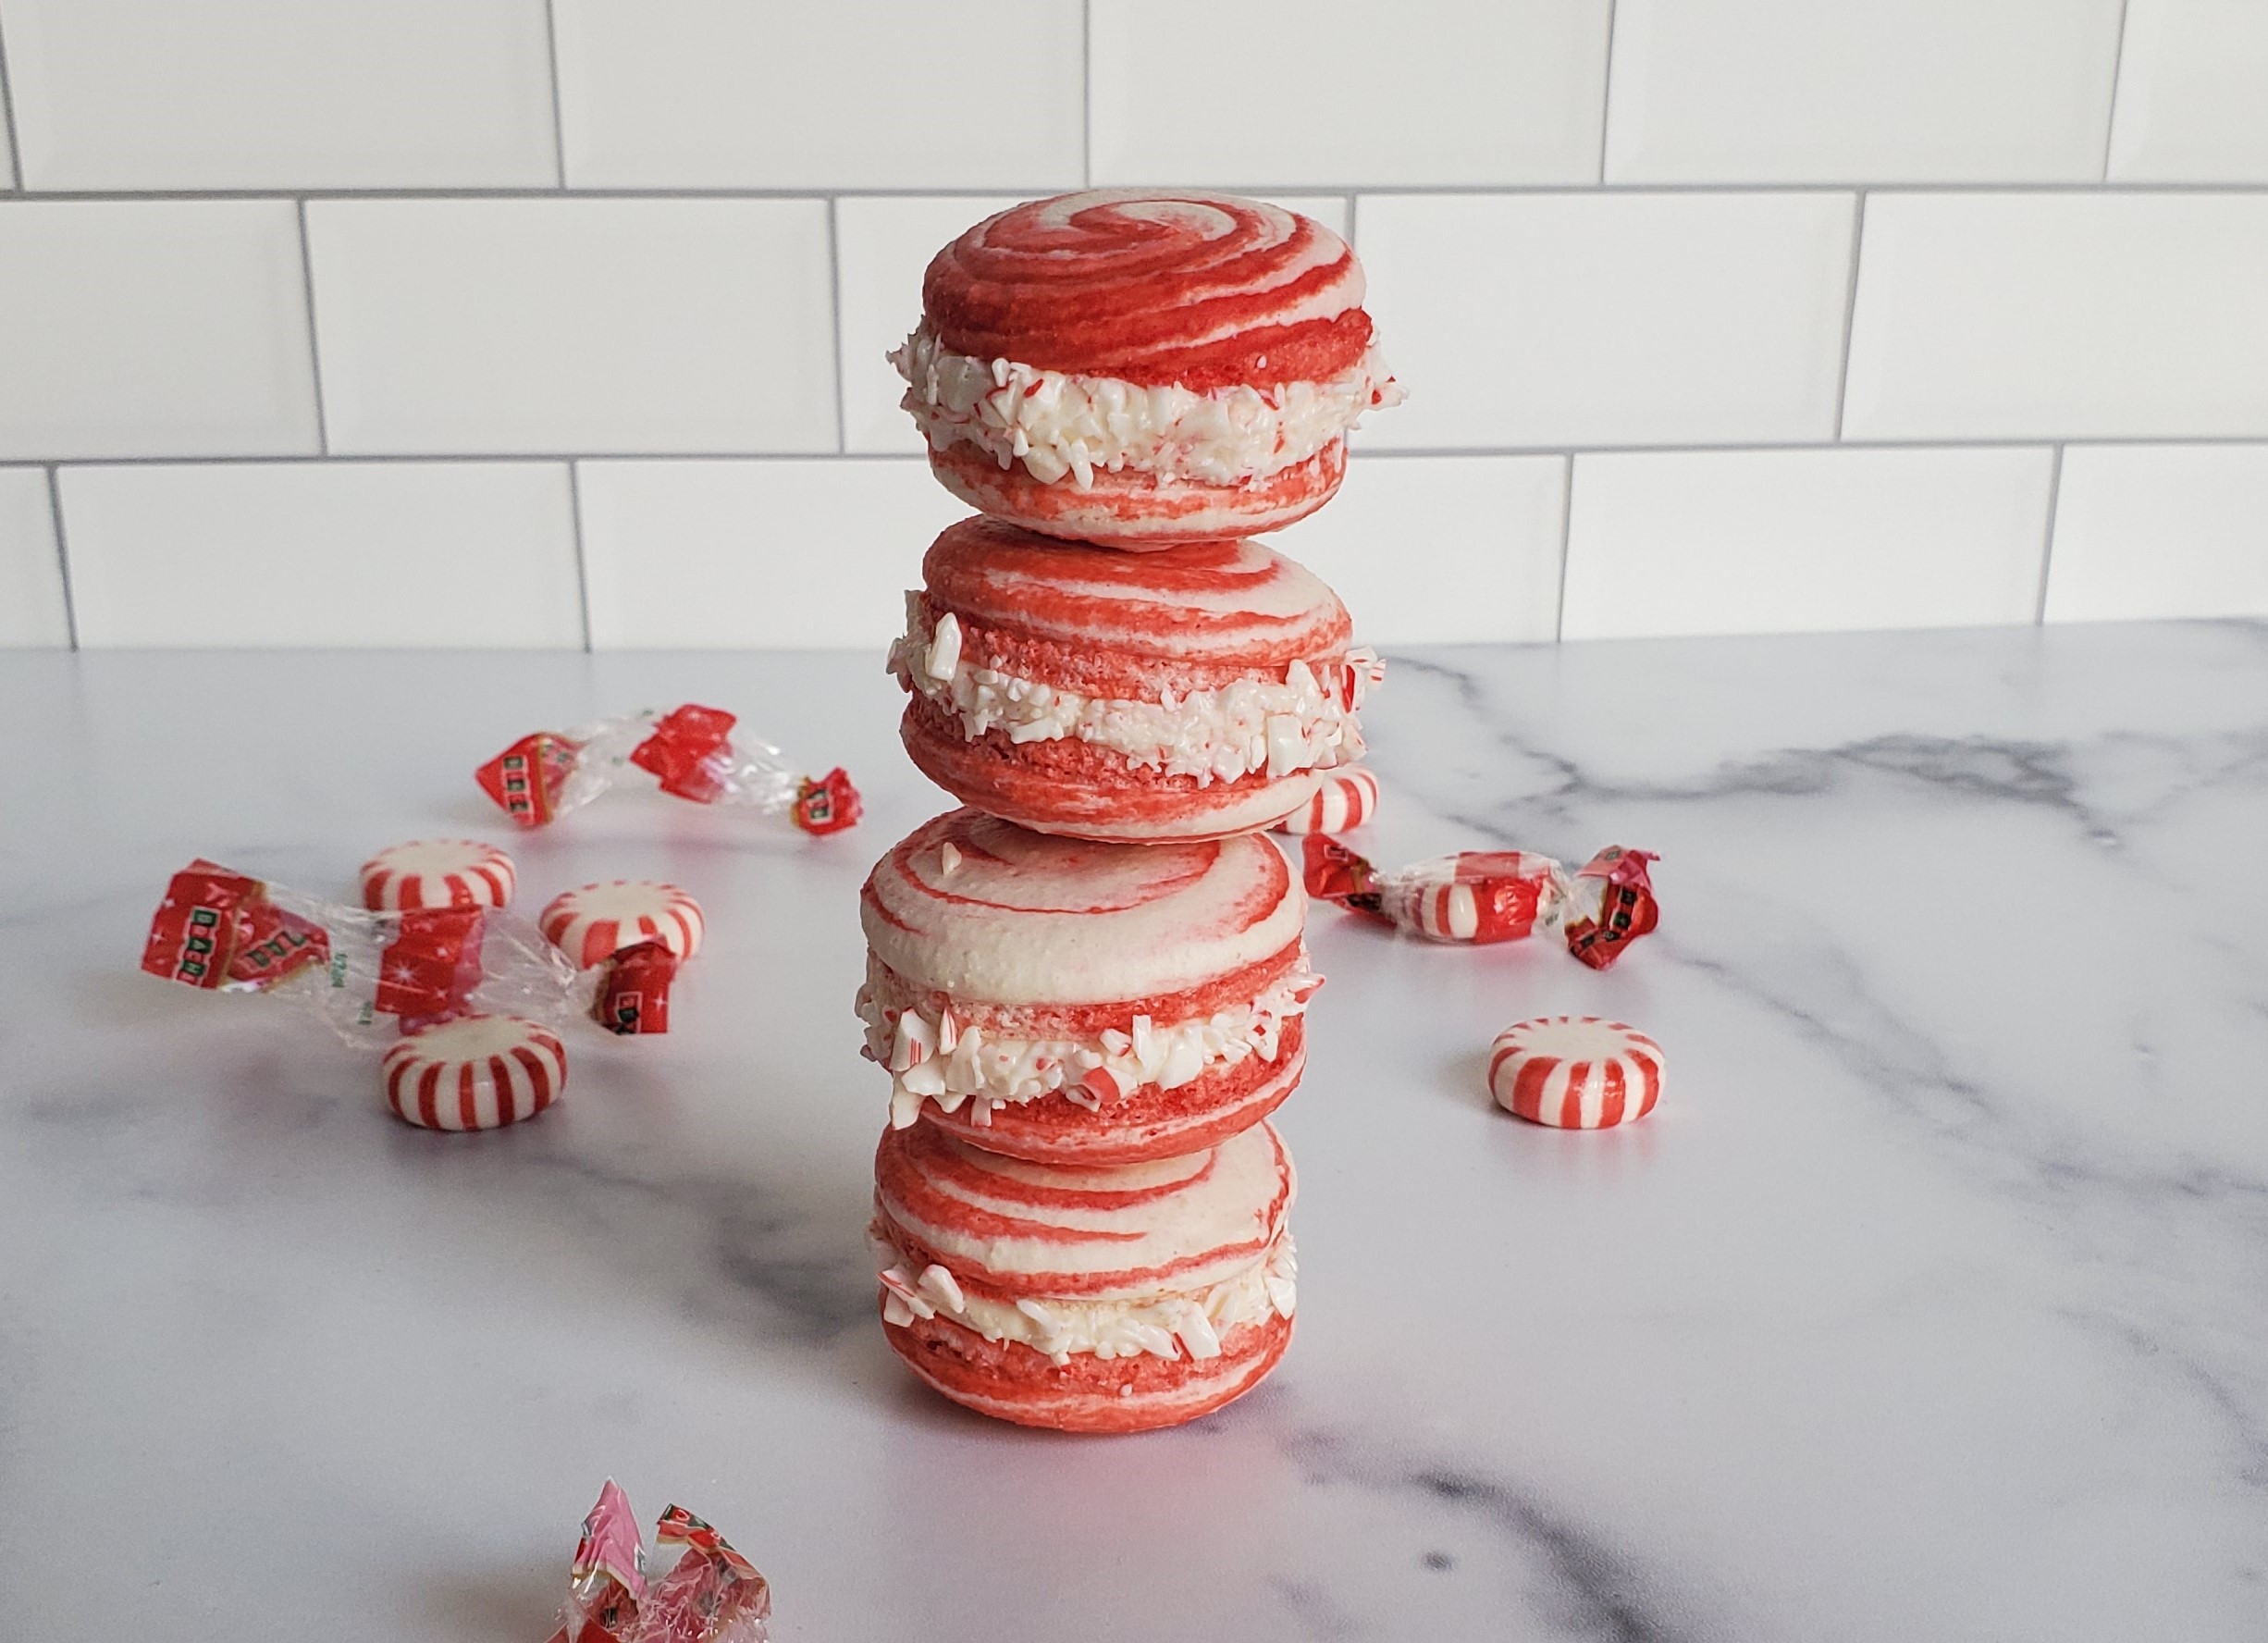 A peppermint macaron tower of 4, surrounded by peppermints and their wrappers.